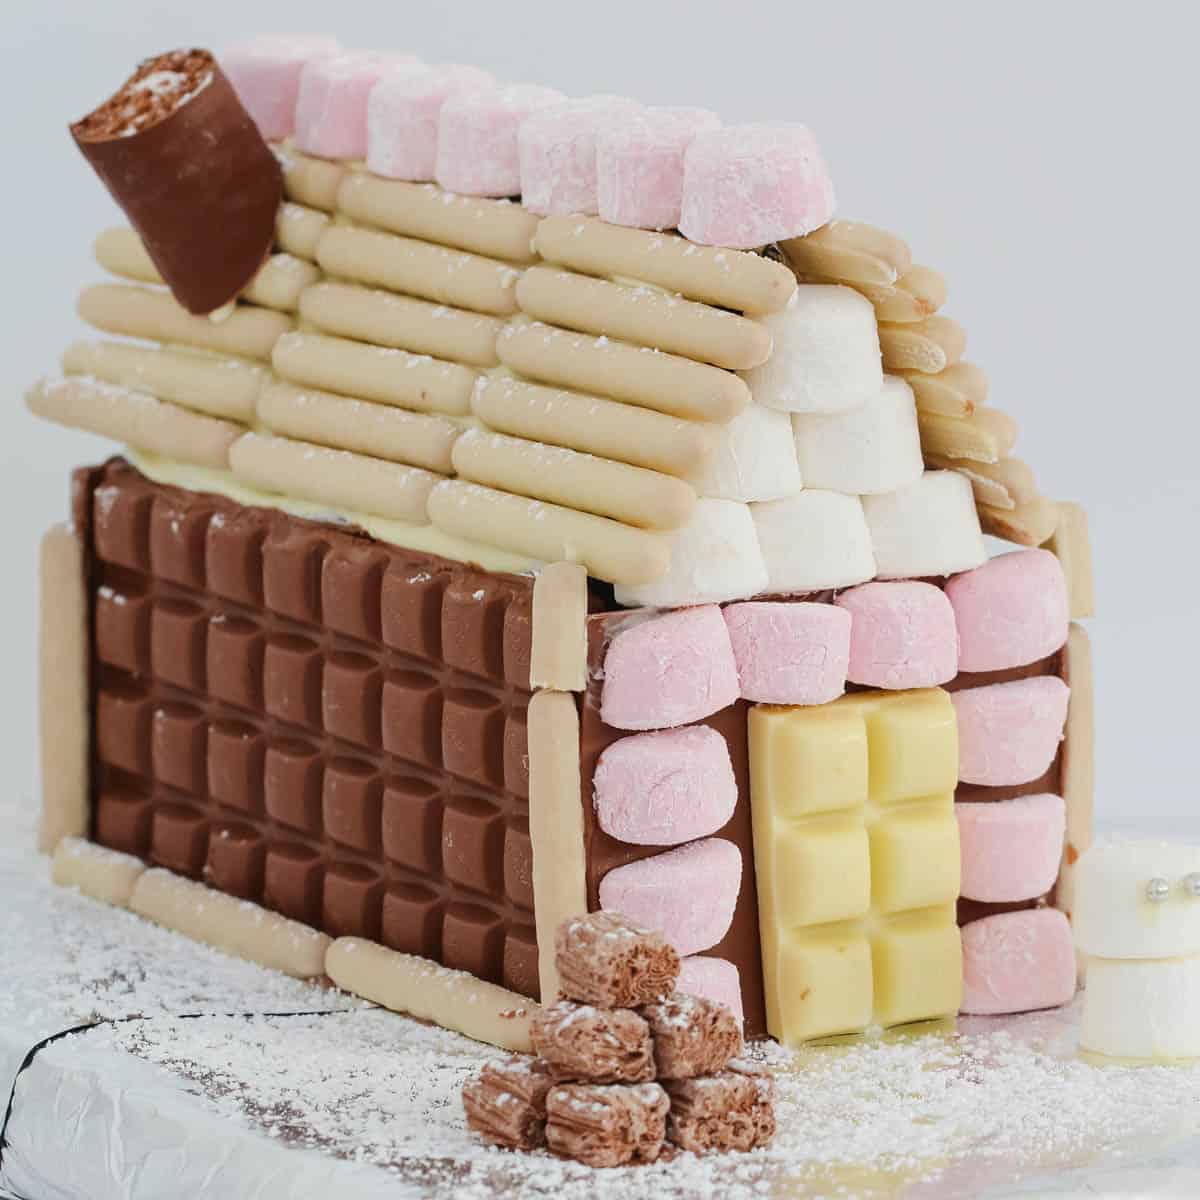 A super easy Chocolate Christmas House that makes an absolute showstopper of a table centrepiece! Use your favourite chocolates to decorate!